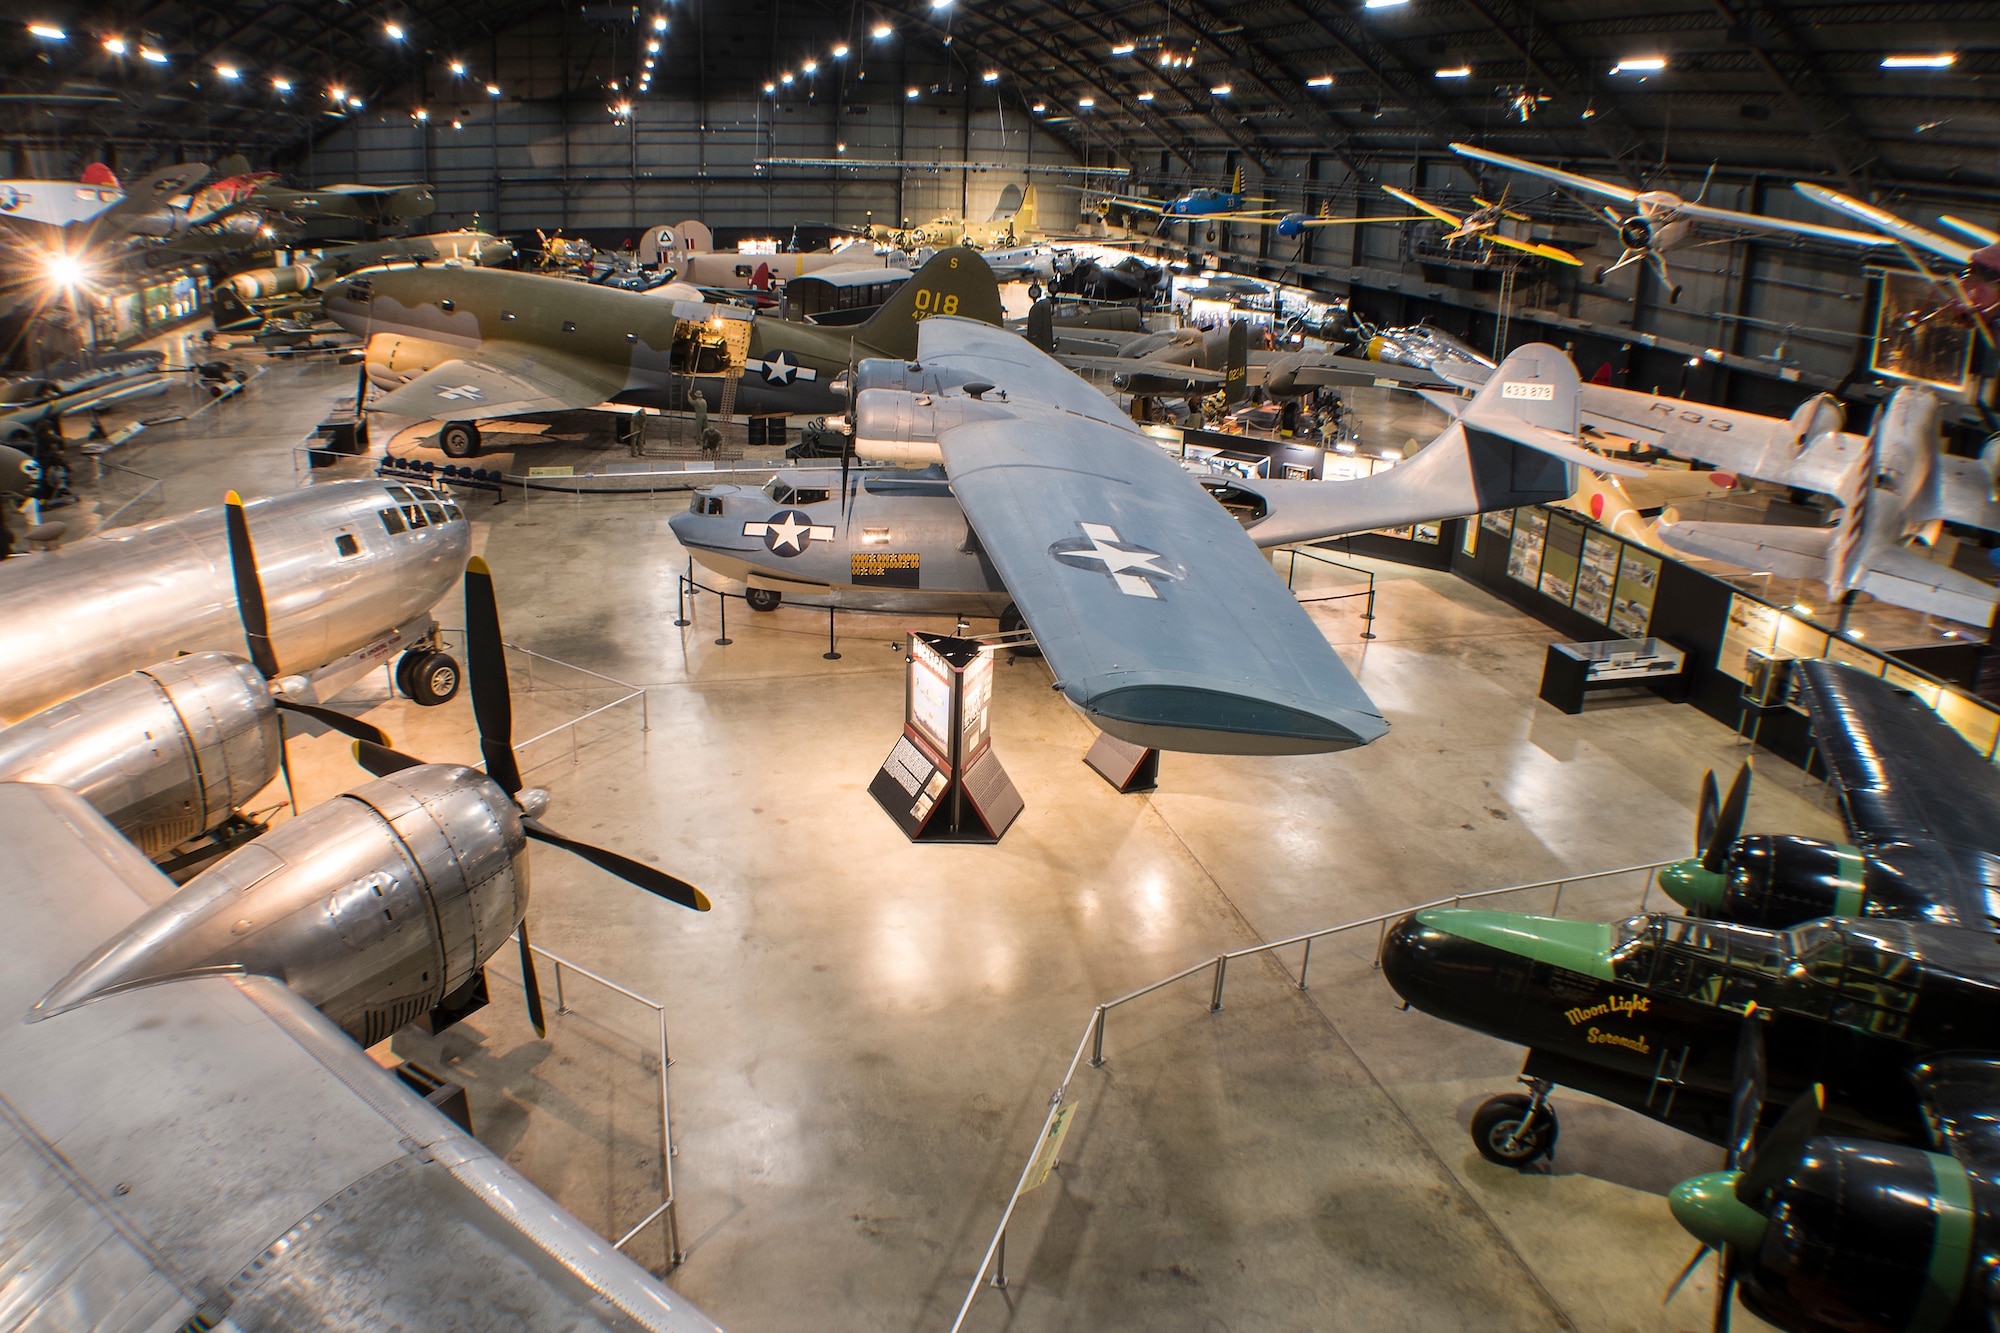 DAYTON, Ohio -- The World War II Gallery at the National Museum of the United States Air Force. (U.S. Air Force photo by Ken LaRock)